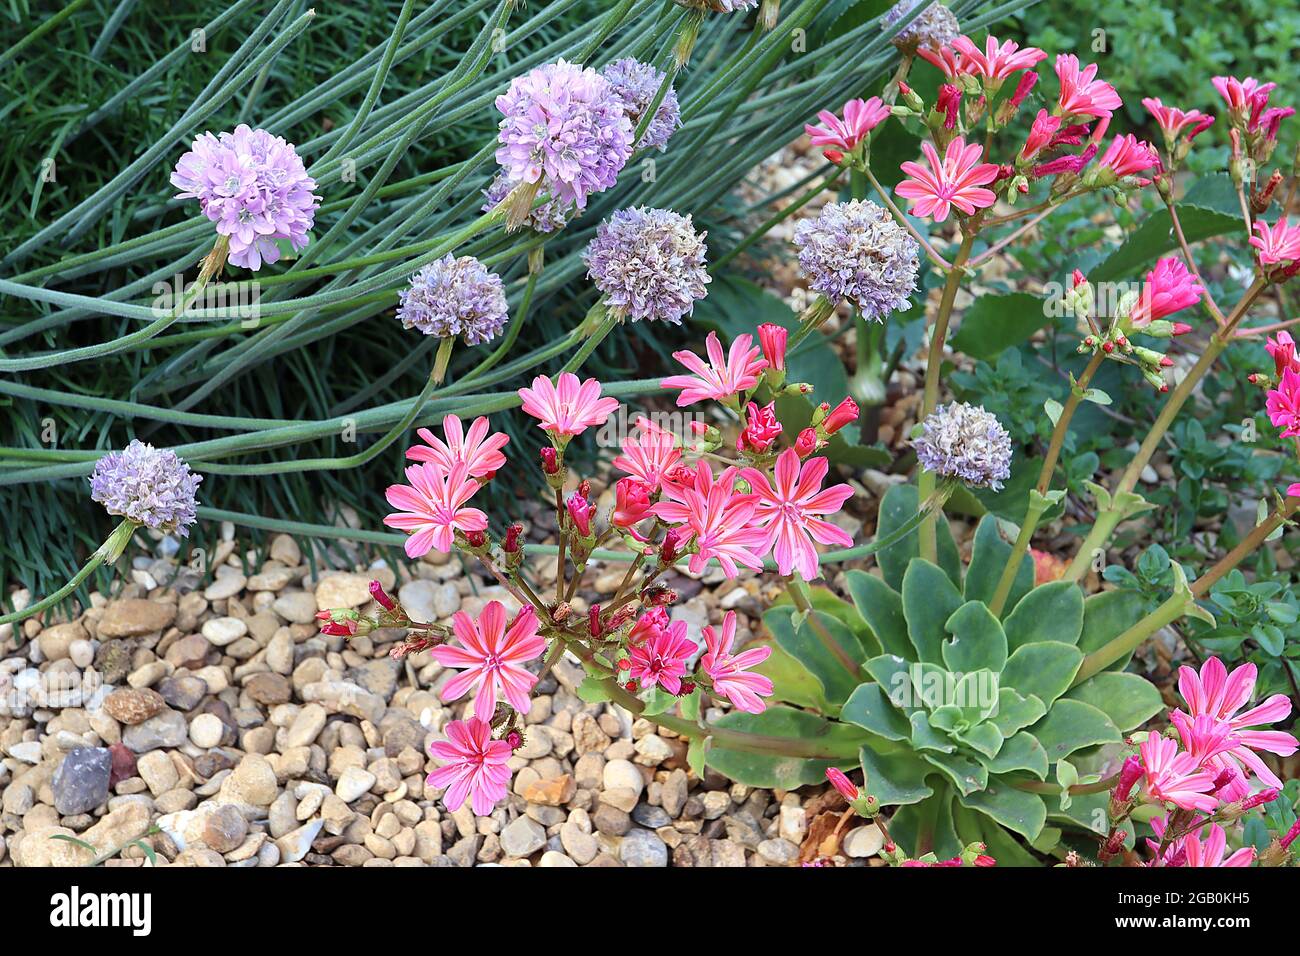 Lewisia cotyledon ‘Little Plum’ Siskiyou lewisia Little Plum – open funnel-shaped pink flowers with deep pink veins and orange stripes,  June, England Stock Photo